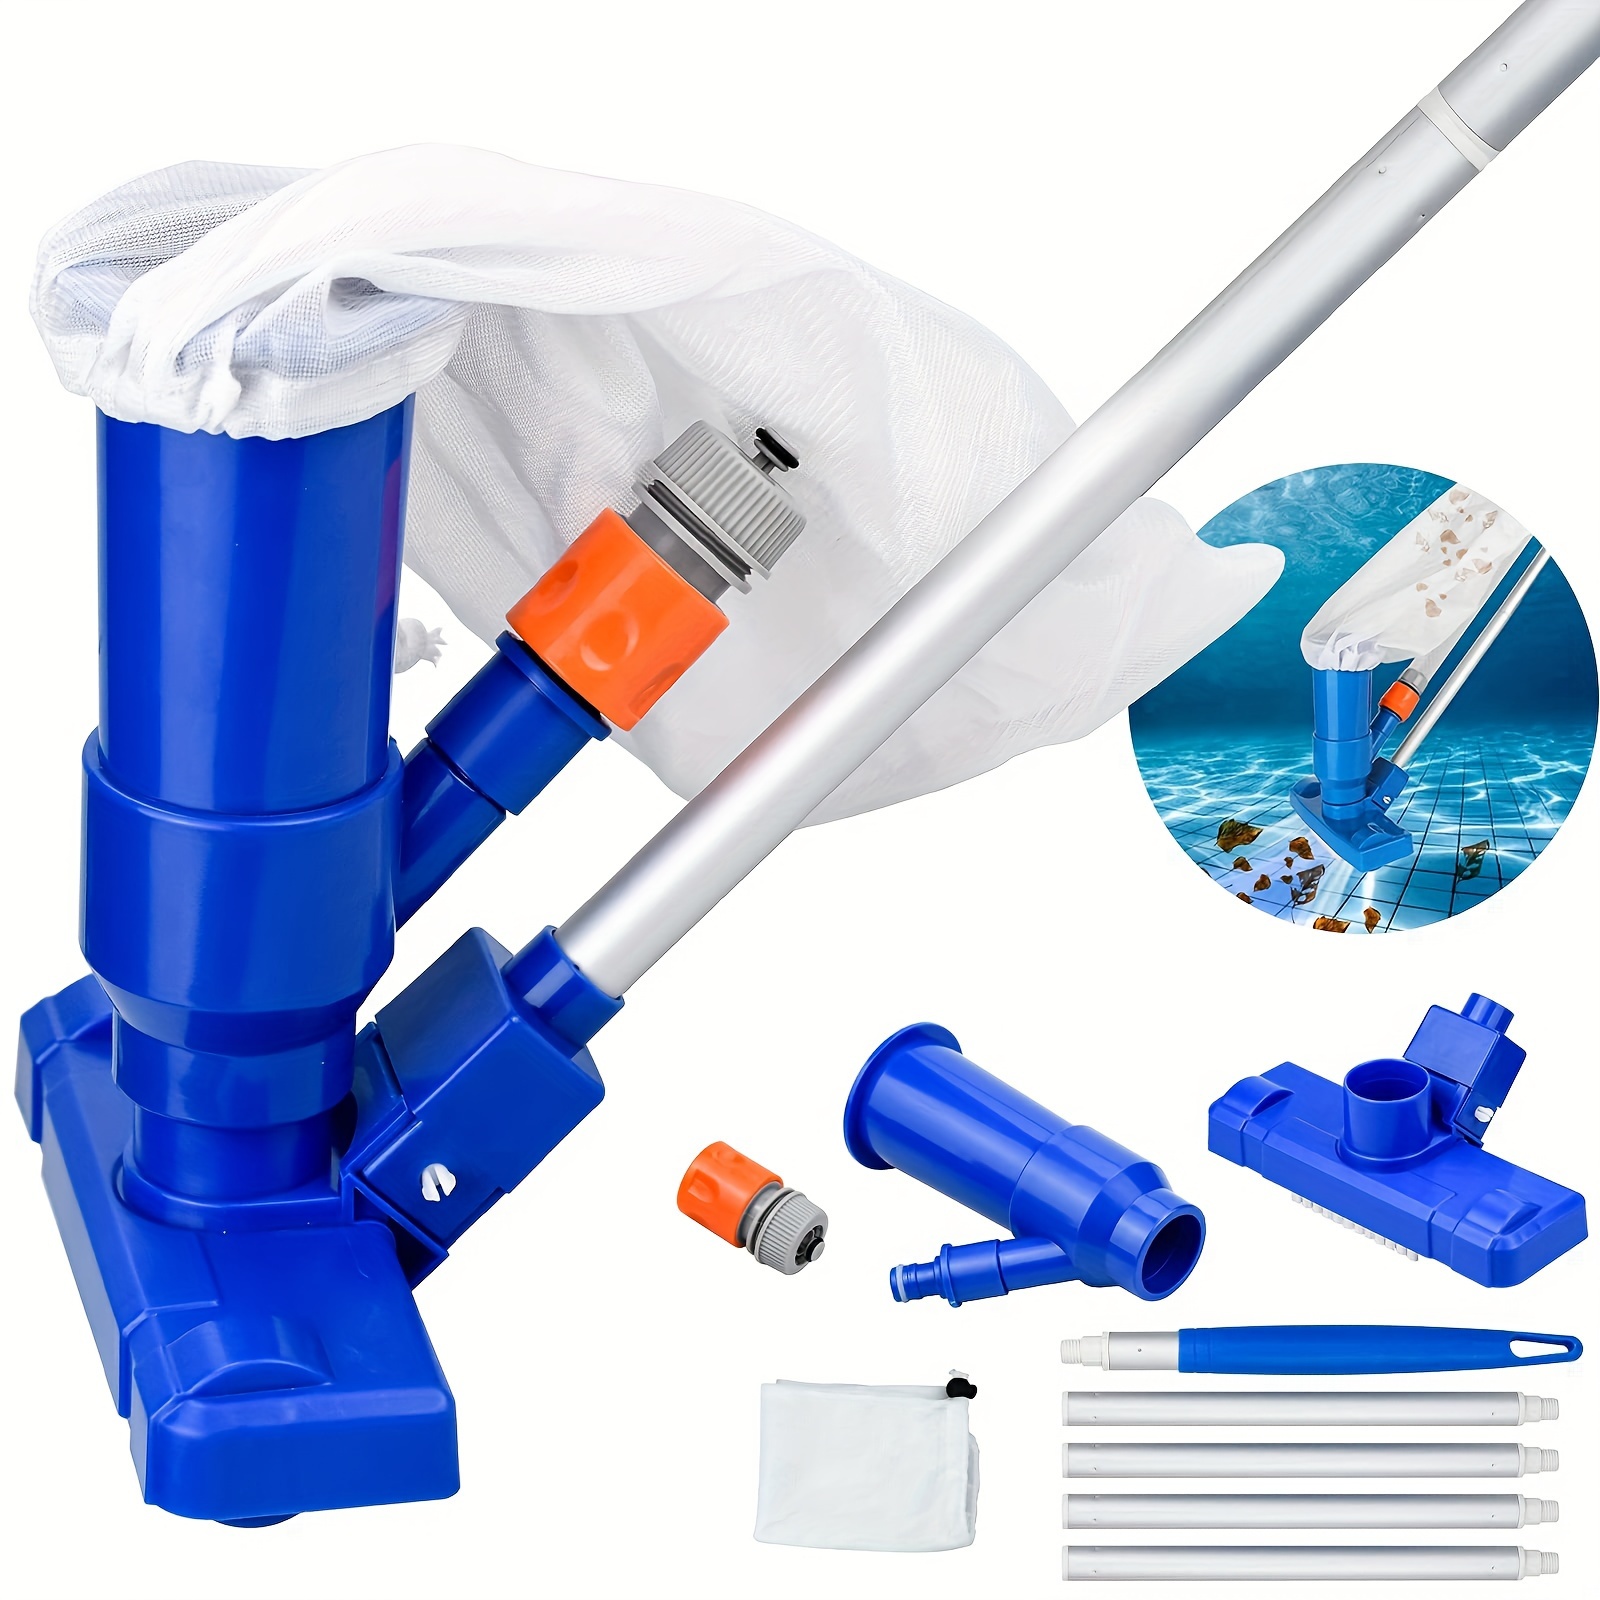 

Efficient Pool Cleaning Kit: Portable Vacuum With Jet Head & Brushes - Fits European Hoses